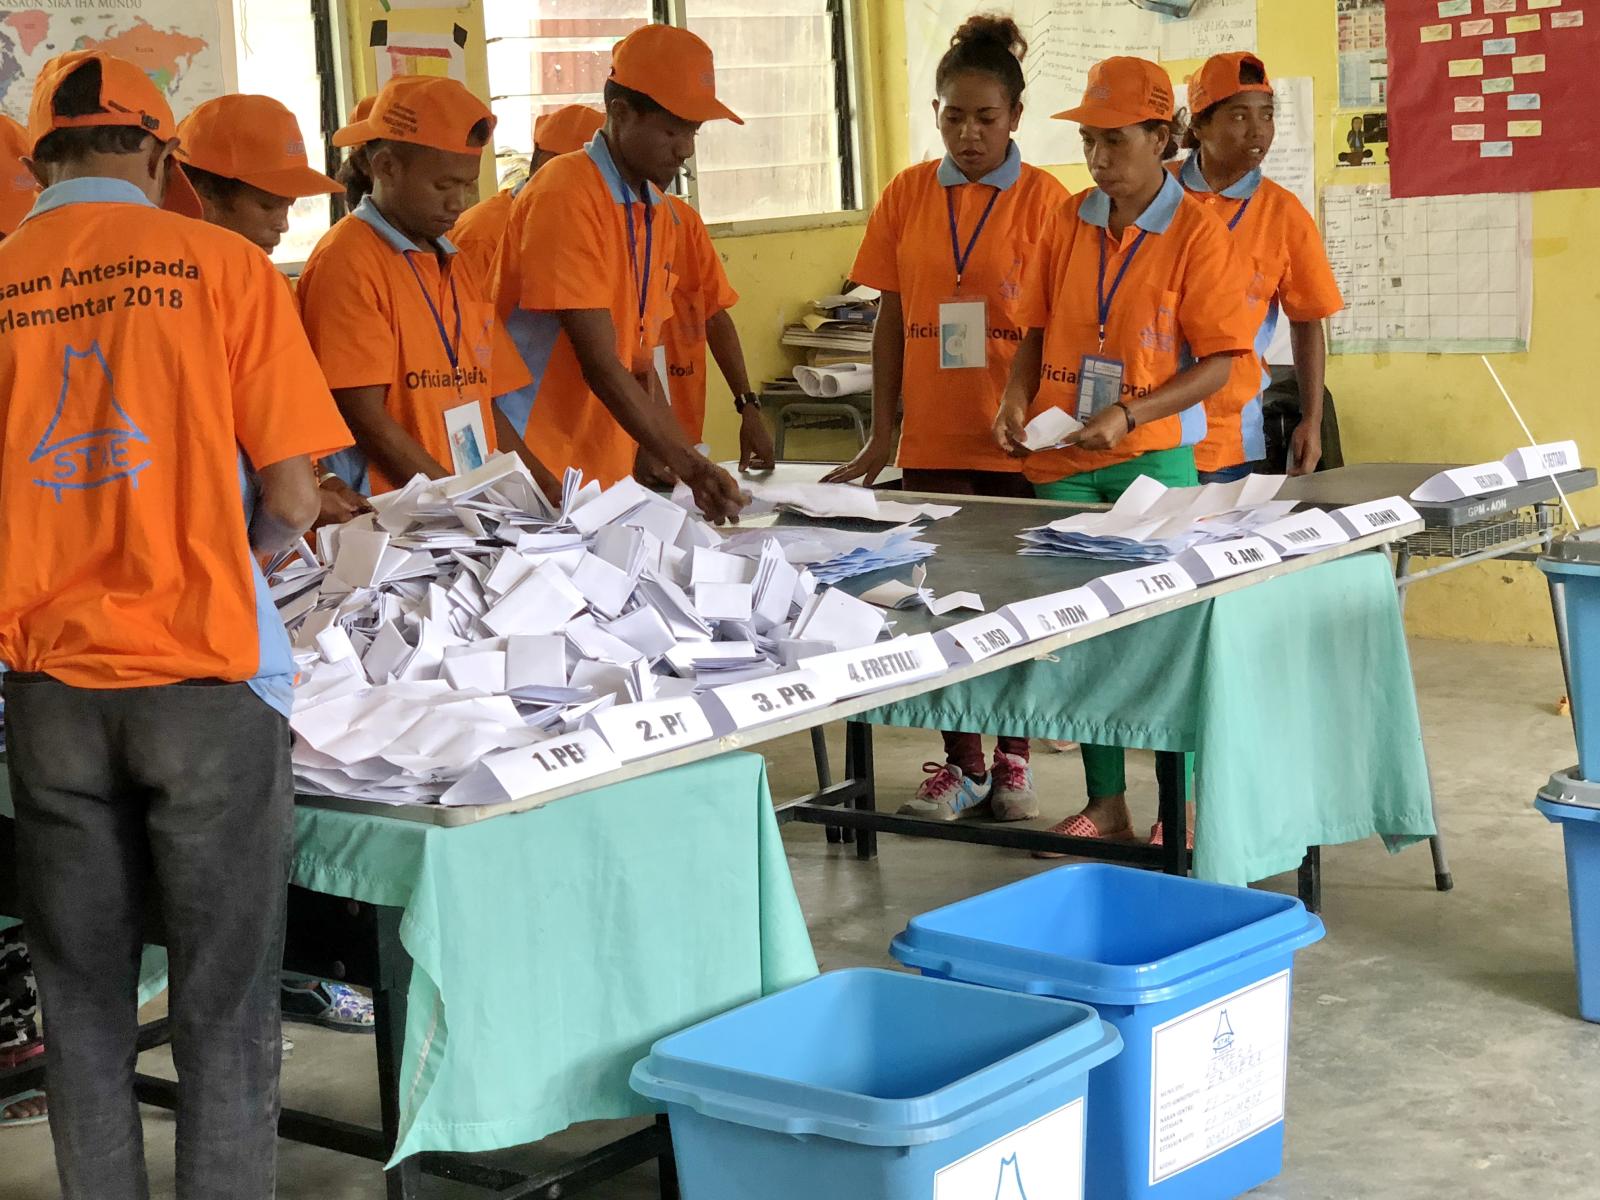 The Technical Secretariat for Electoral Administration (STAE) sorts ballots during the 2018 Timor-Leste parliamentary elections.